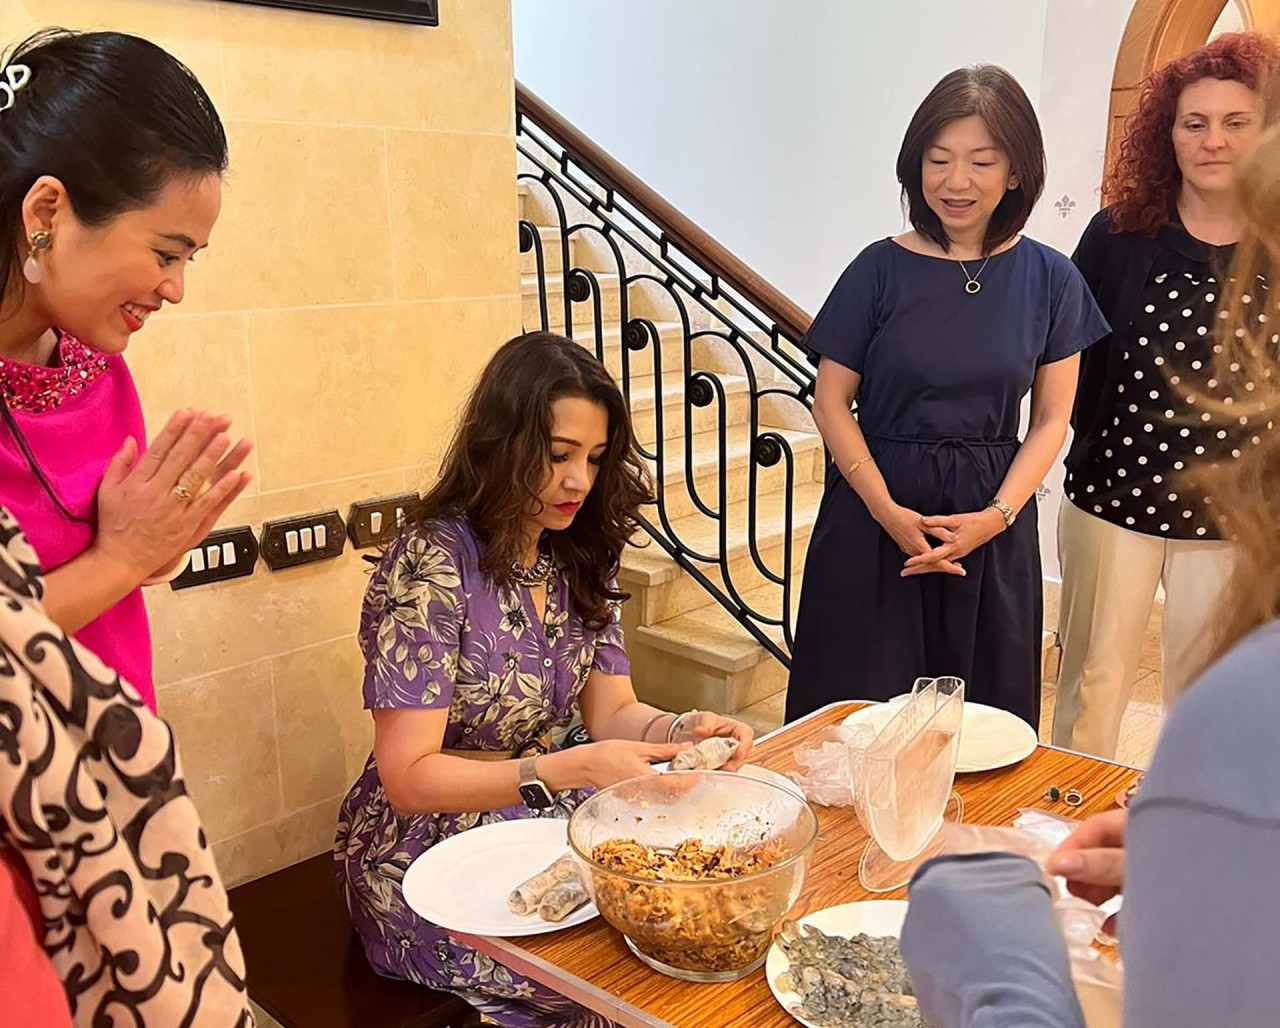 Int'l Friends, Ambassadors’ Spouses in Egypt Introduced to Vietnamese Traditional Dishes